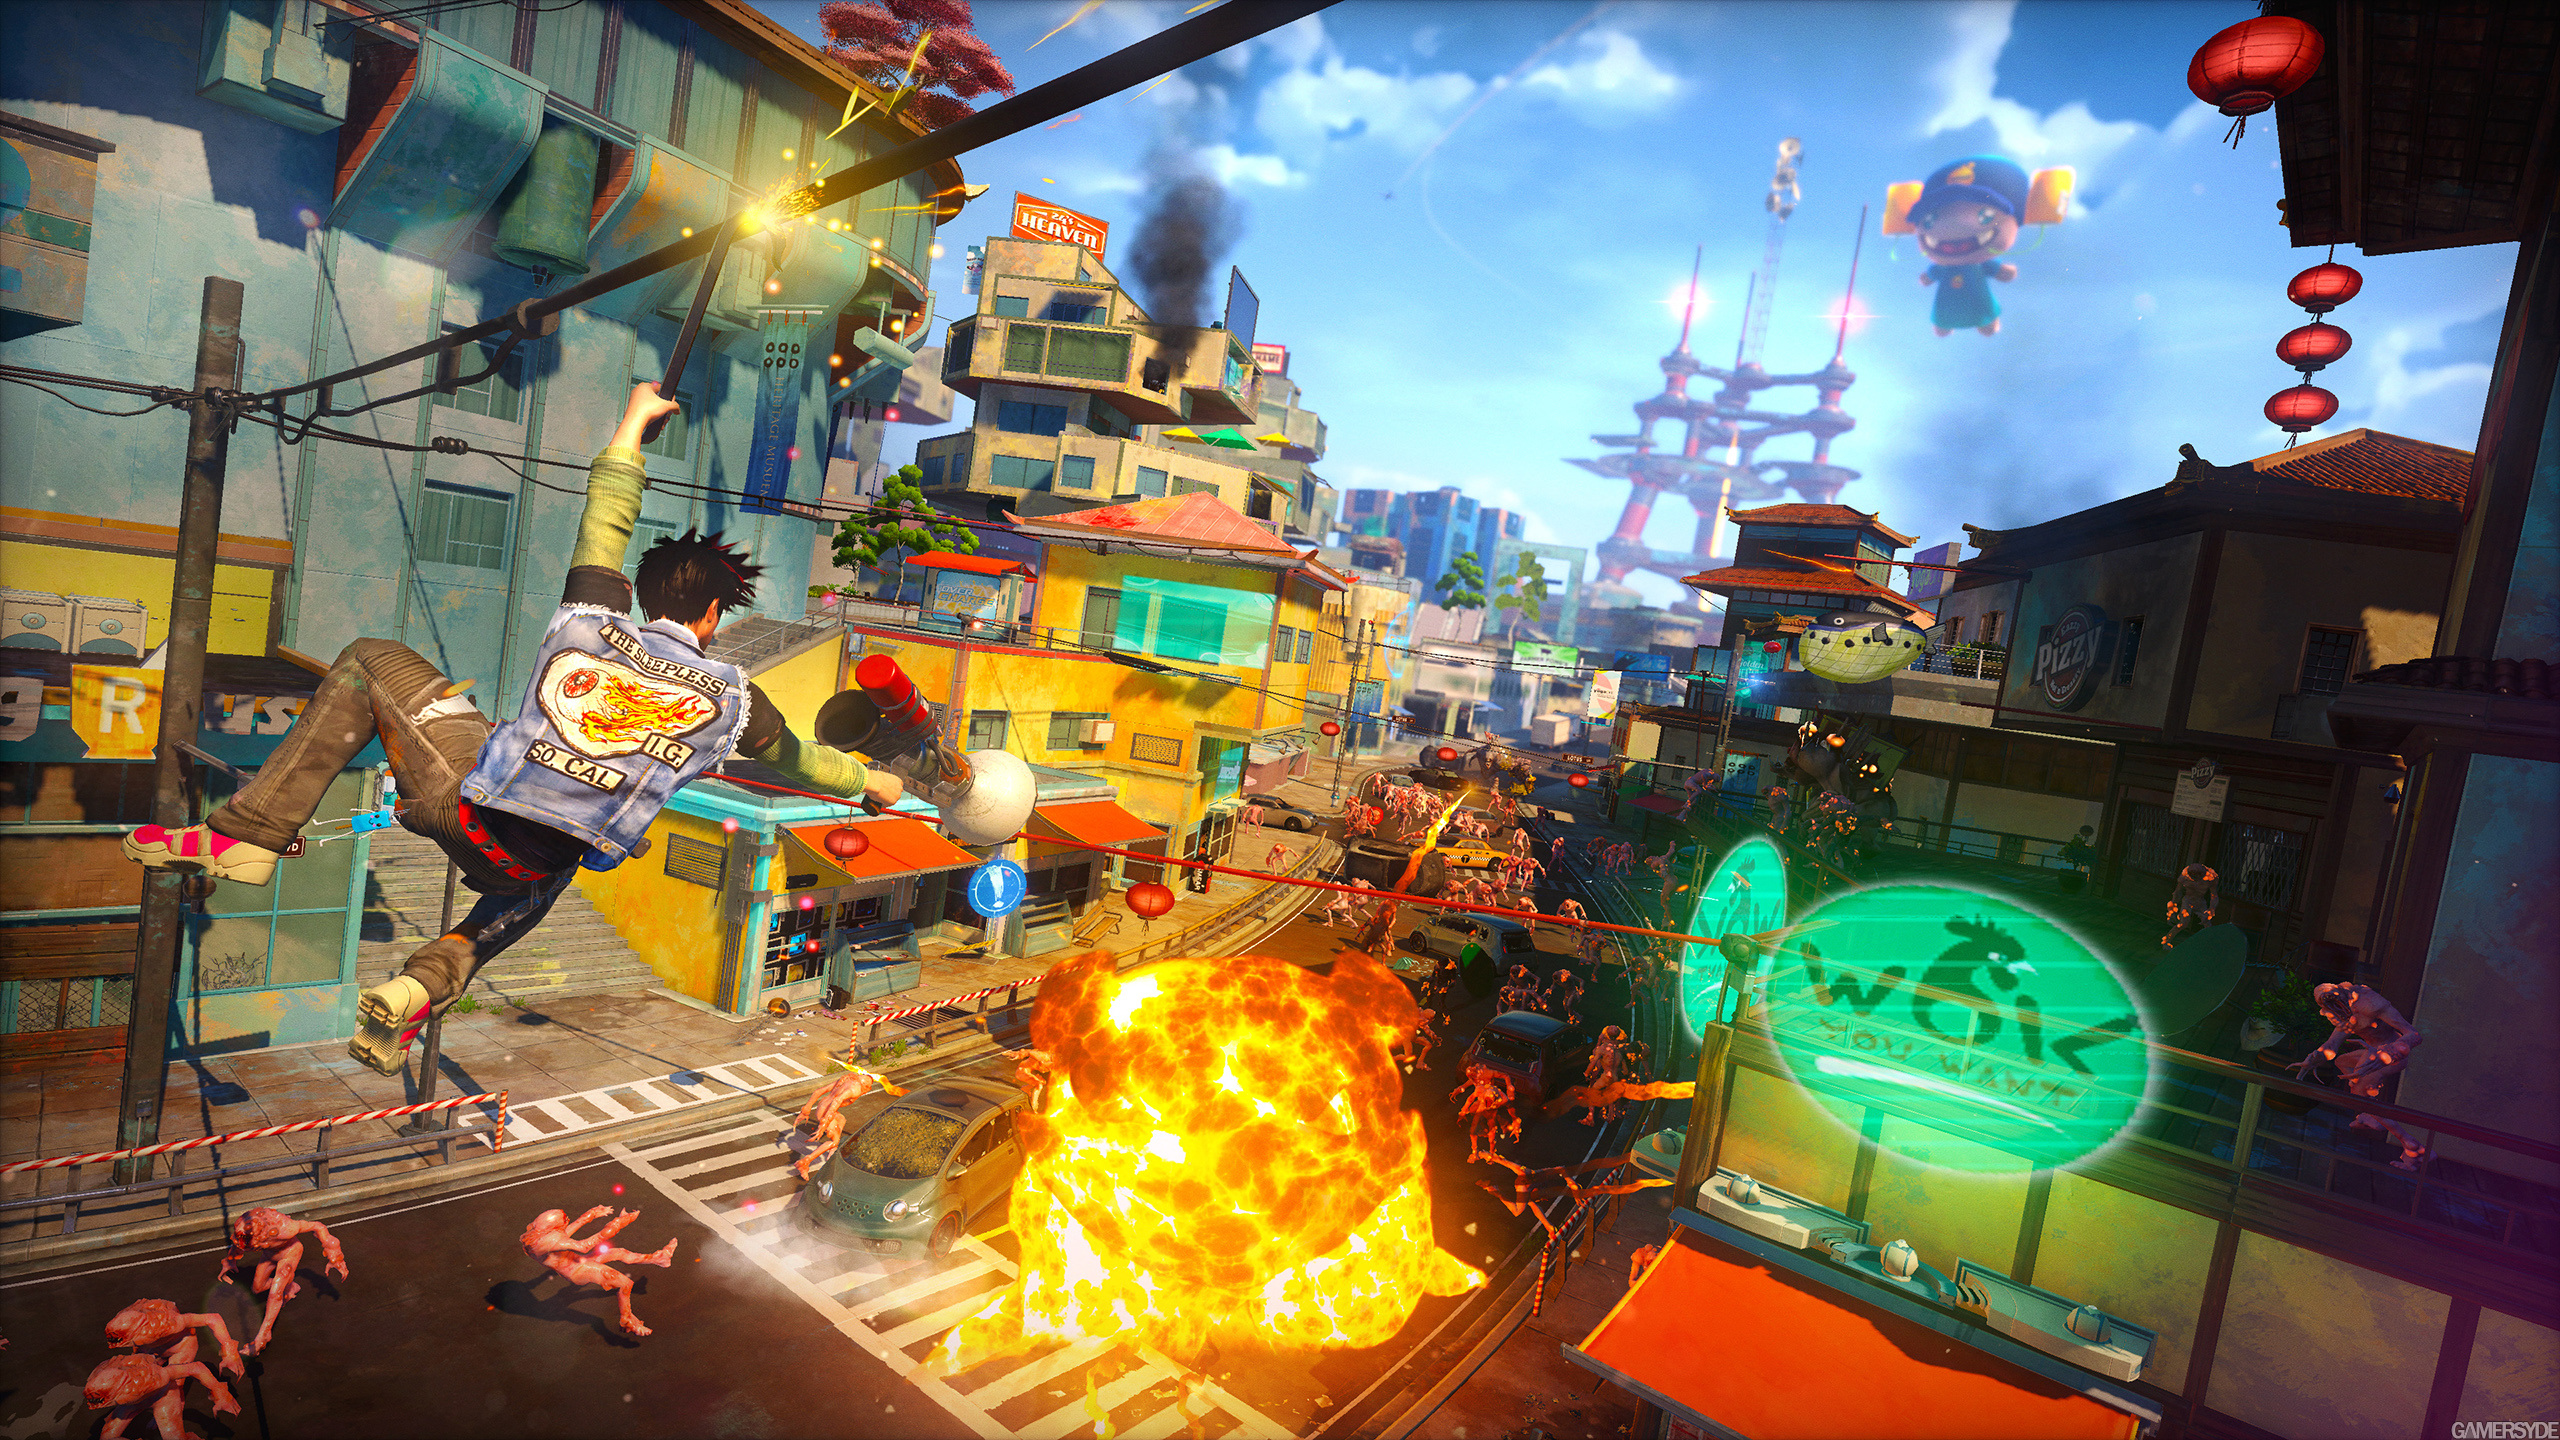 Xbox One Exclusive Sunset Overdrive is The Opposite of The Last of Us  says Insomniac - GameSpot